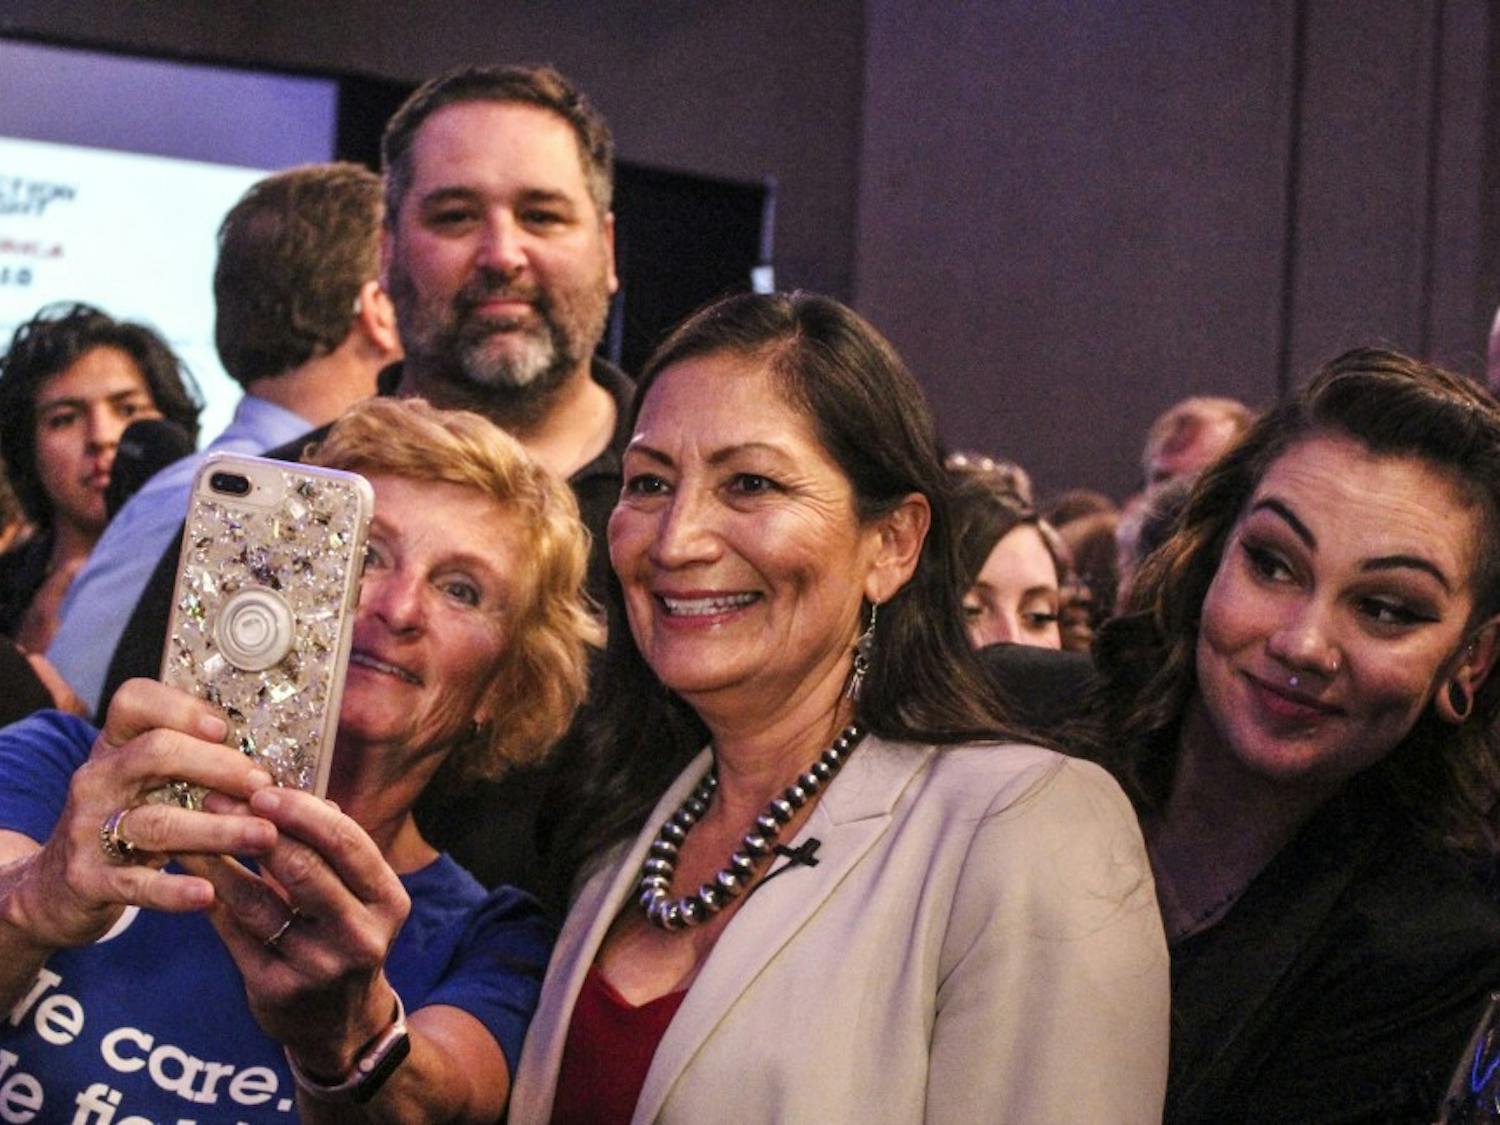 Deb Haaland and her daughter Somah (right) pose for a photo with supporters after winning the race for the 1st Congressional District Tuesday, Nov. 6.